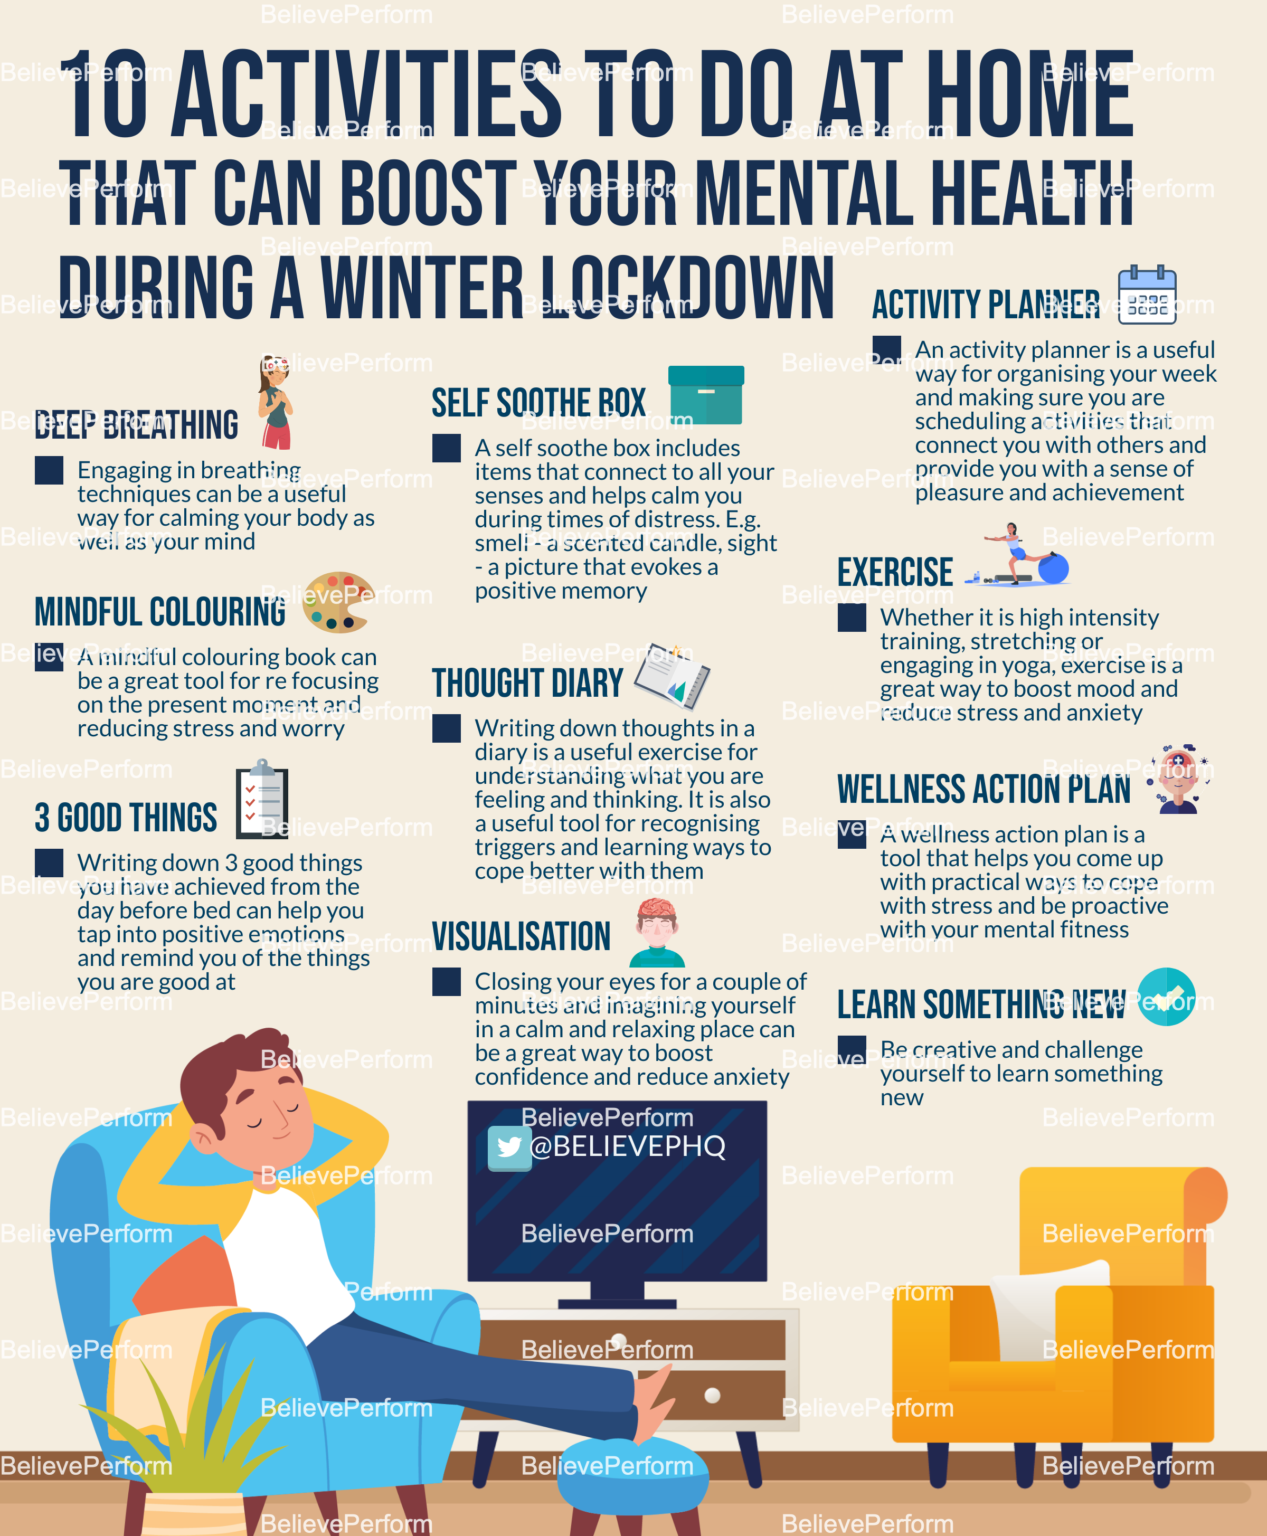 10-activities-to-do-at-home-that-can-boost-your-mental-health-during-a